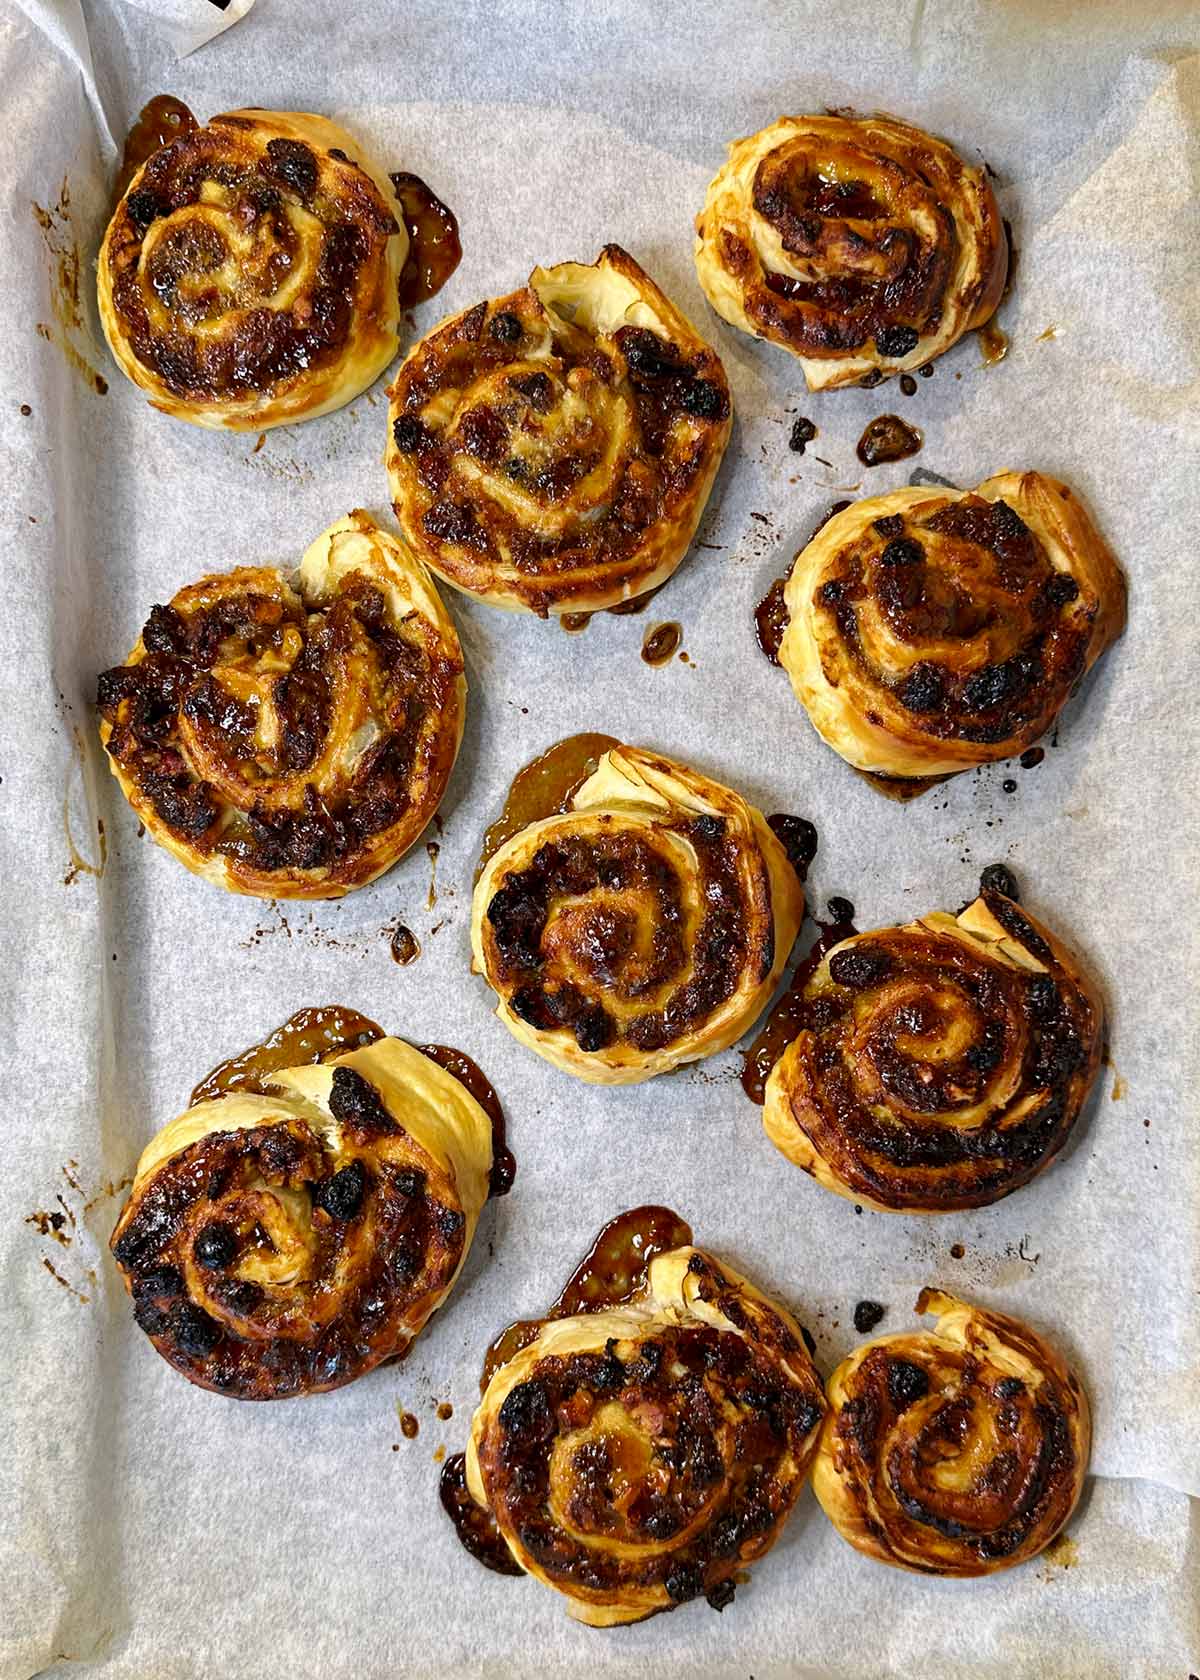 Cooked pinwheels on the baking tray.